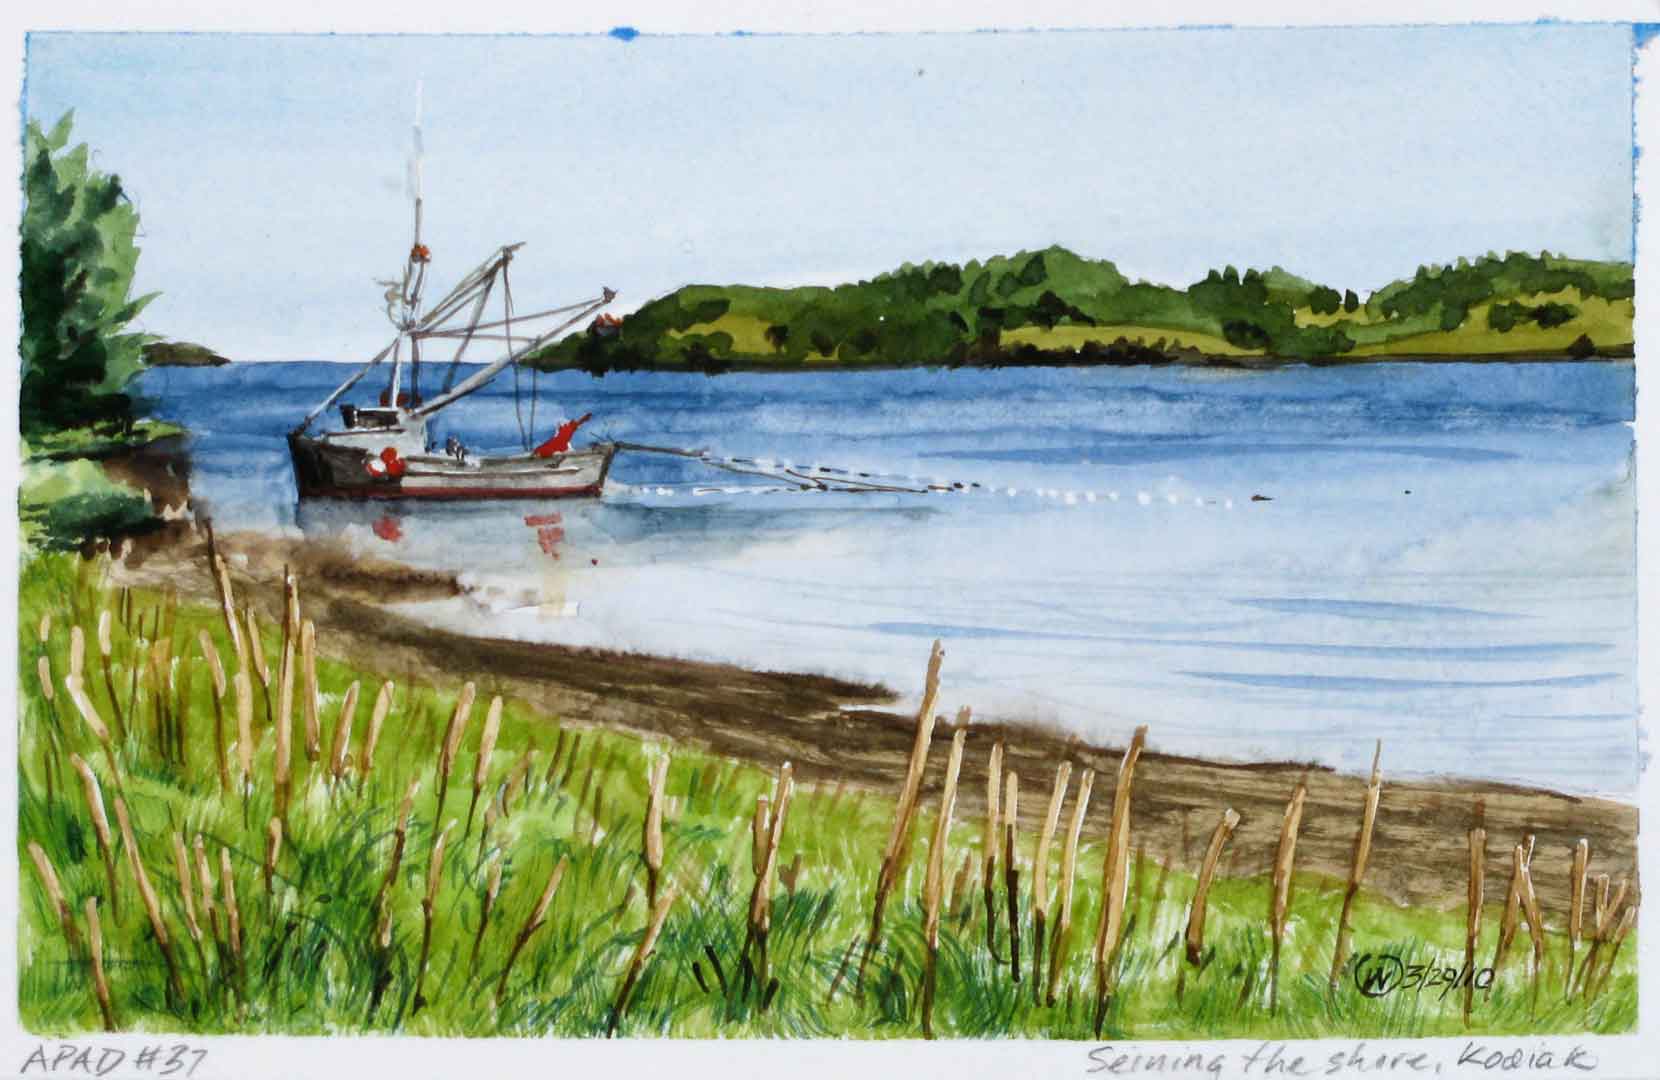 Setting the Shore, Watercolor on paper, 8 x 5